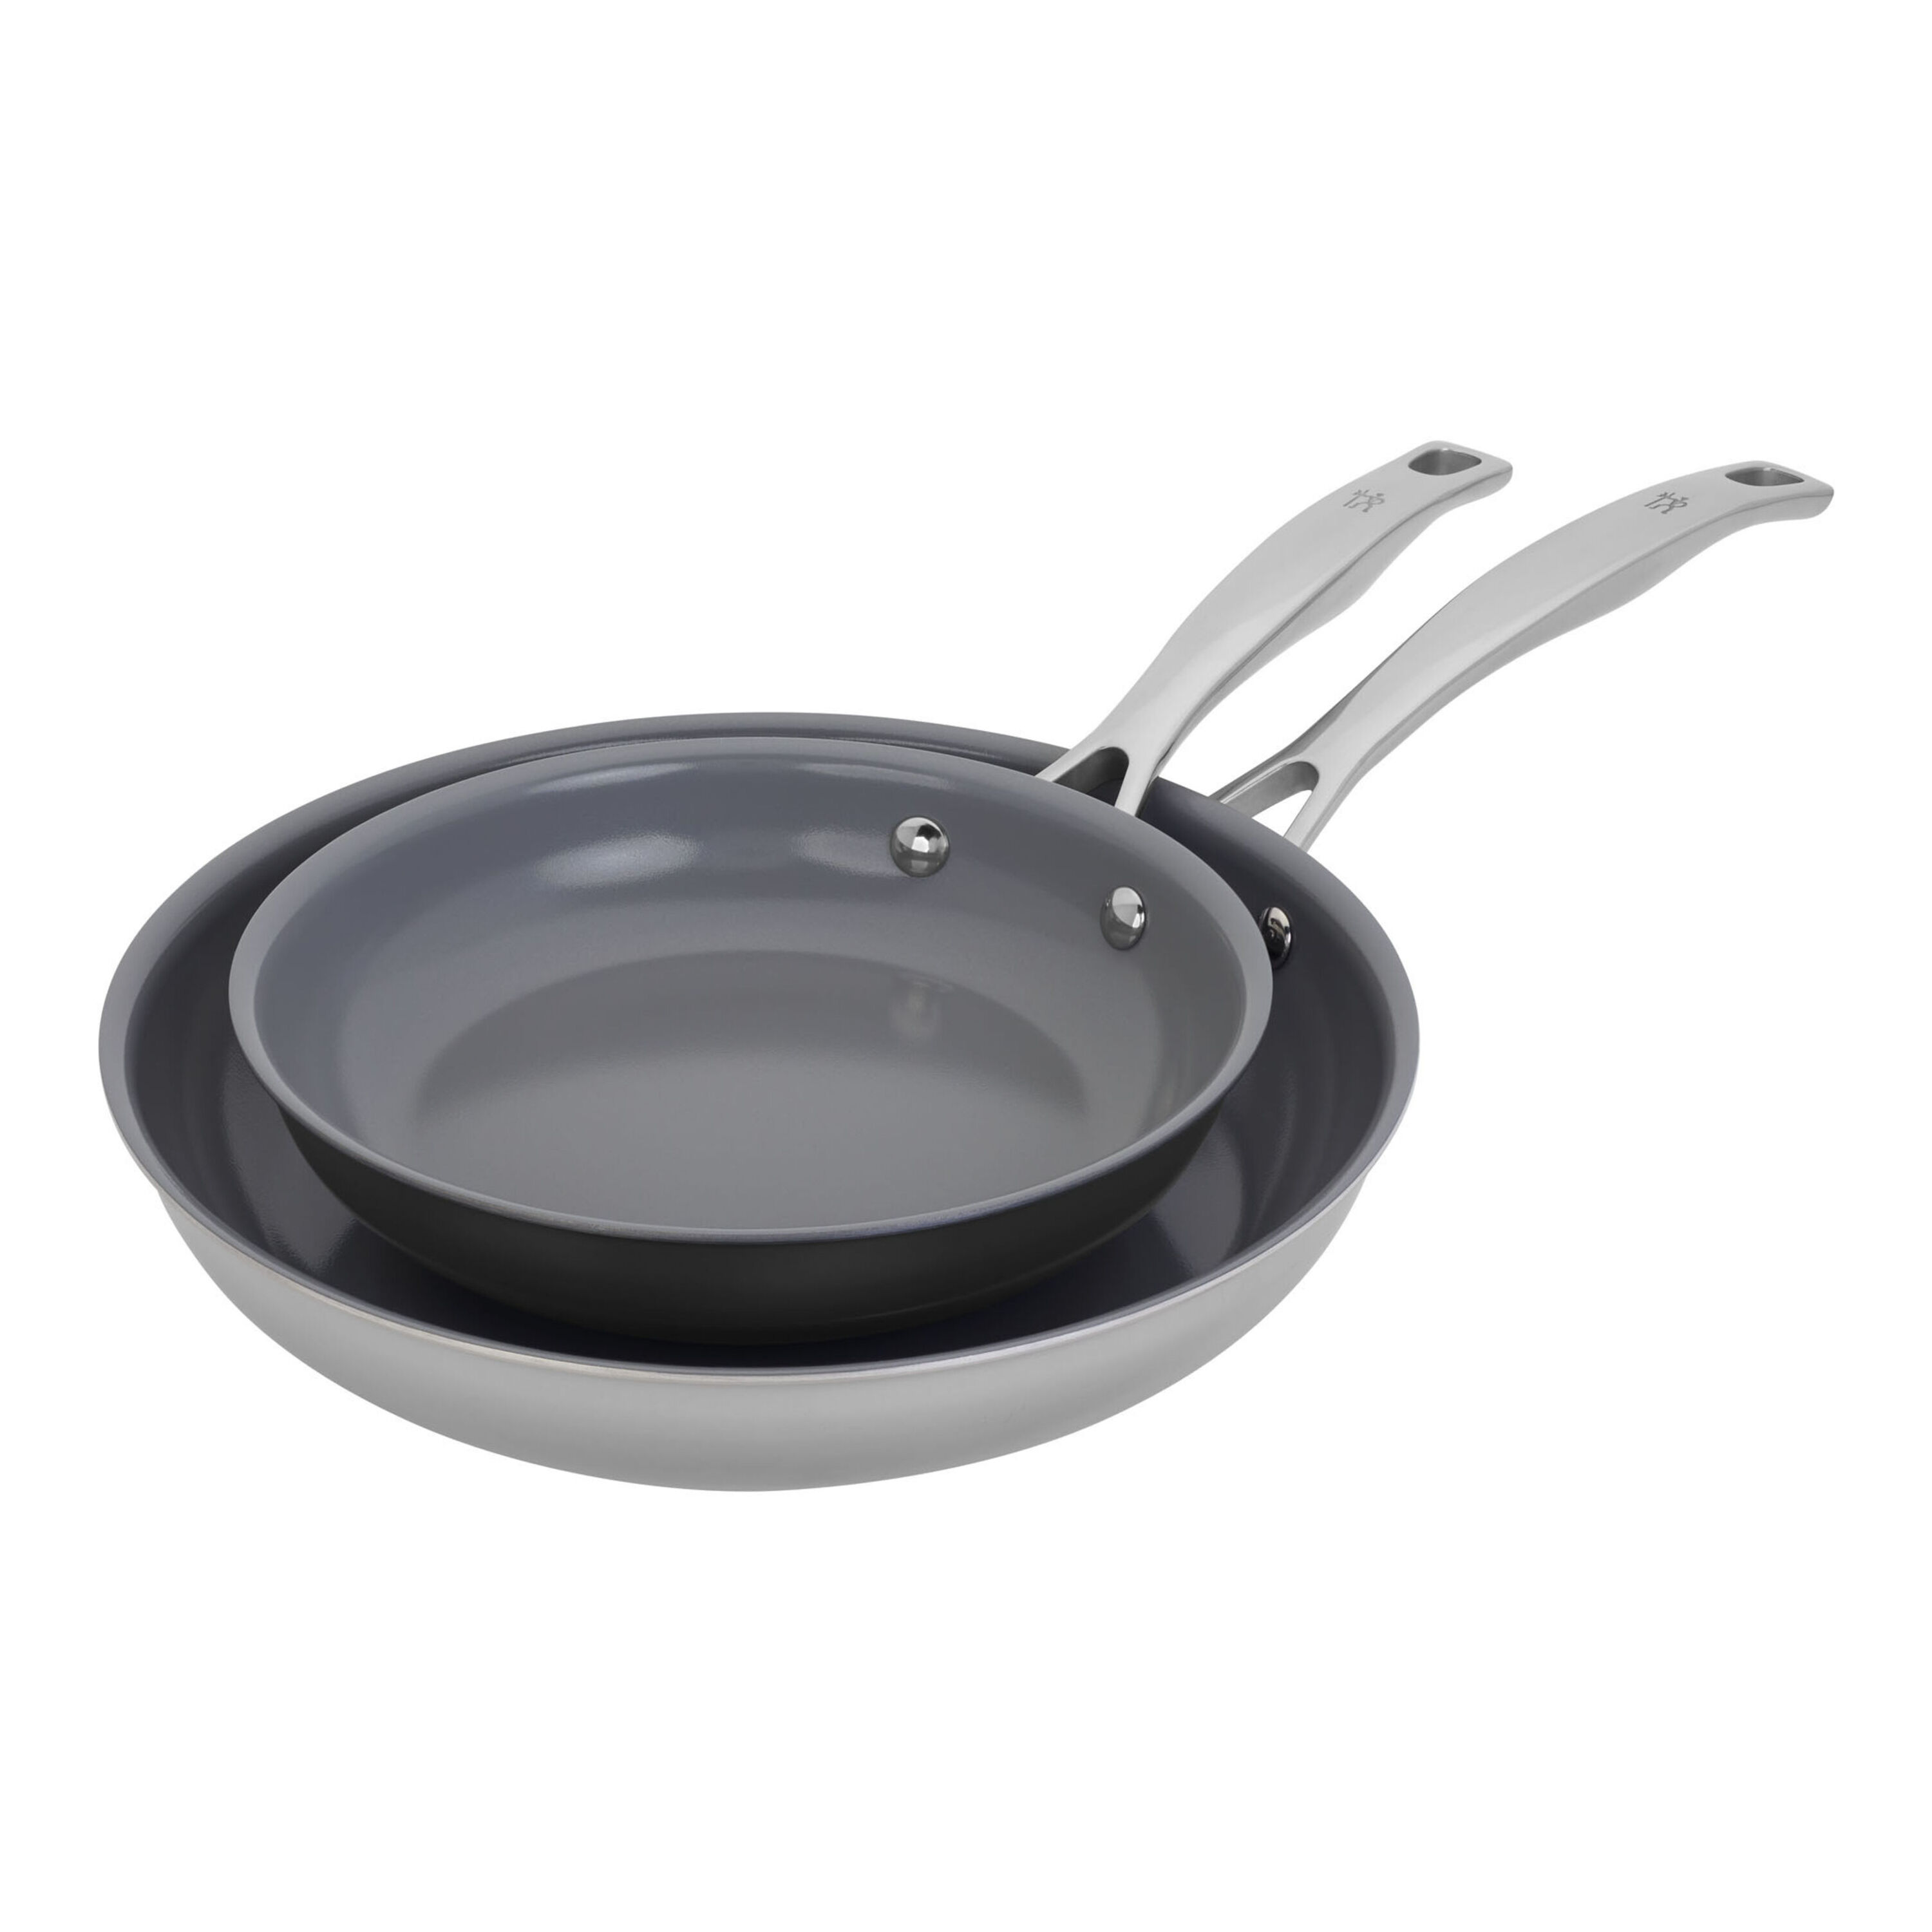 Le Creuset 2-Piece Nonstick Fry Pan Set - Stainless Steel – Chef's